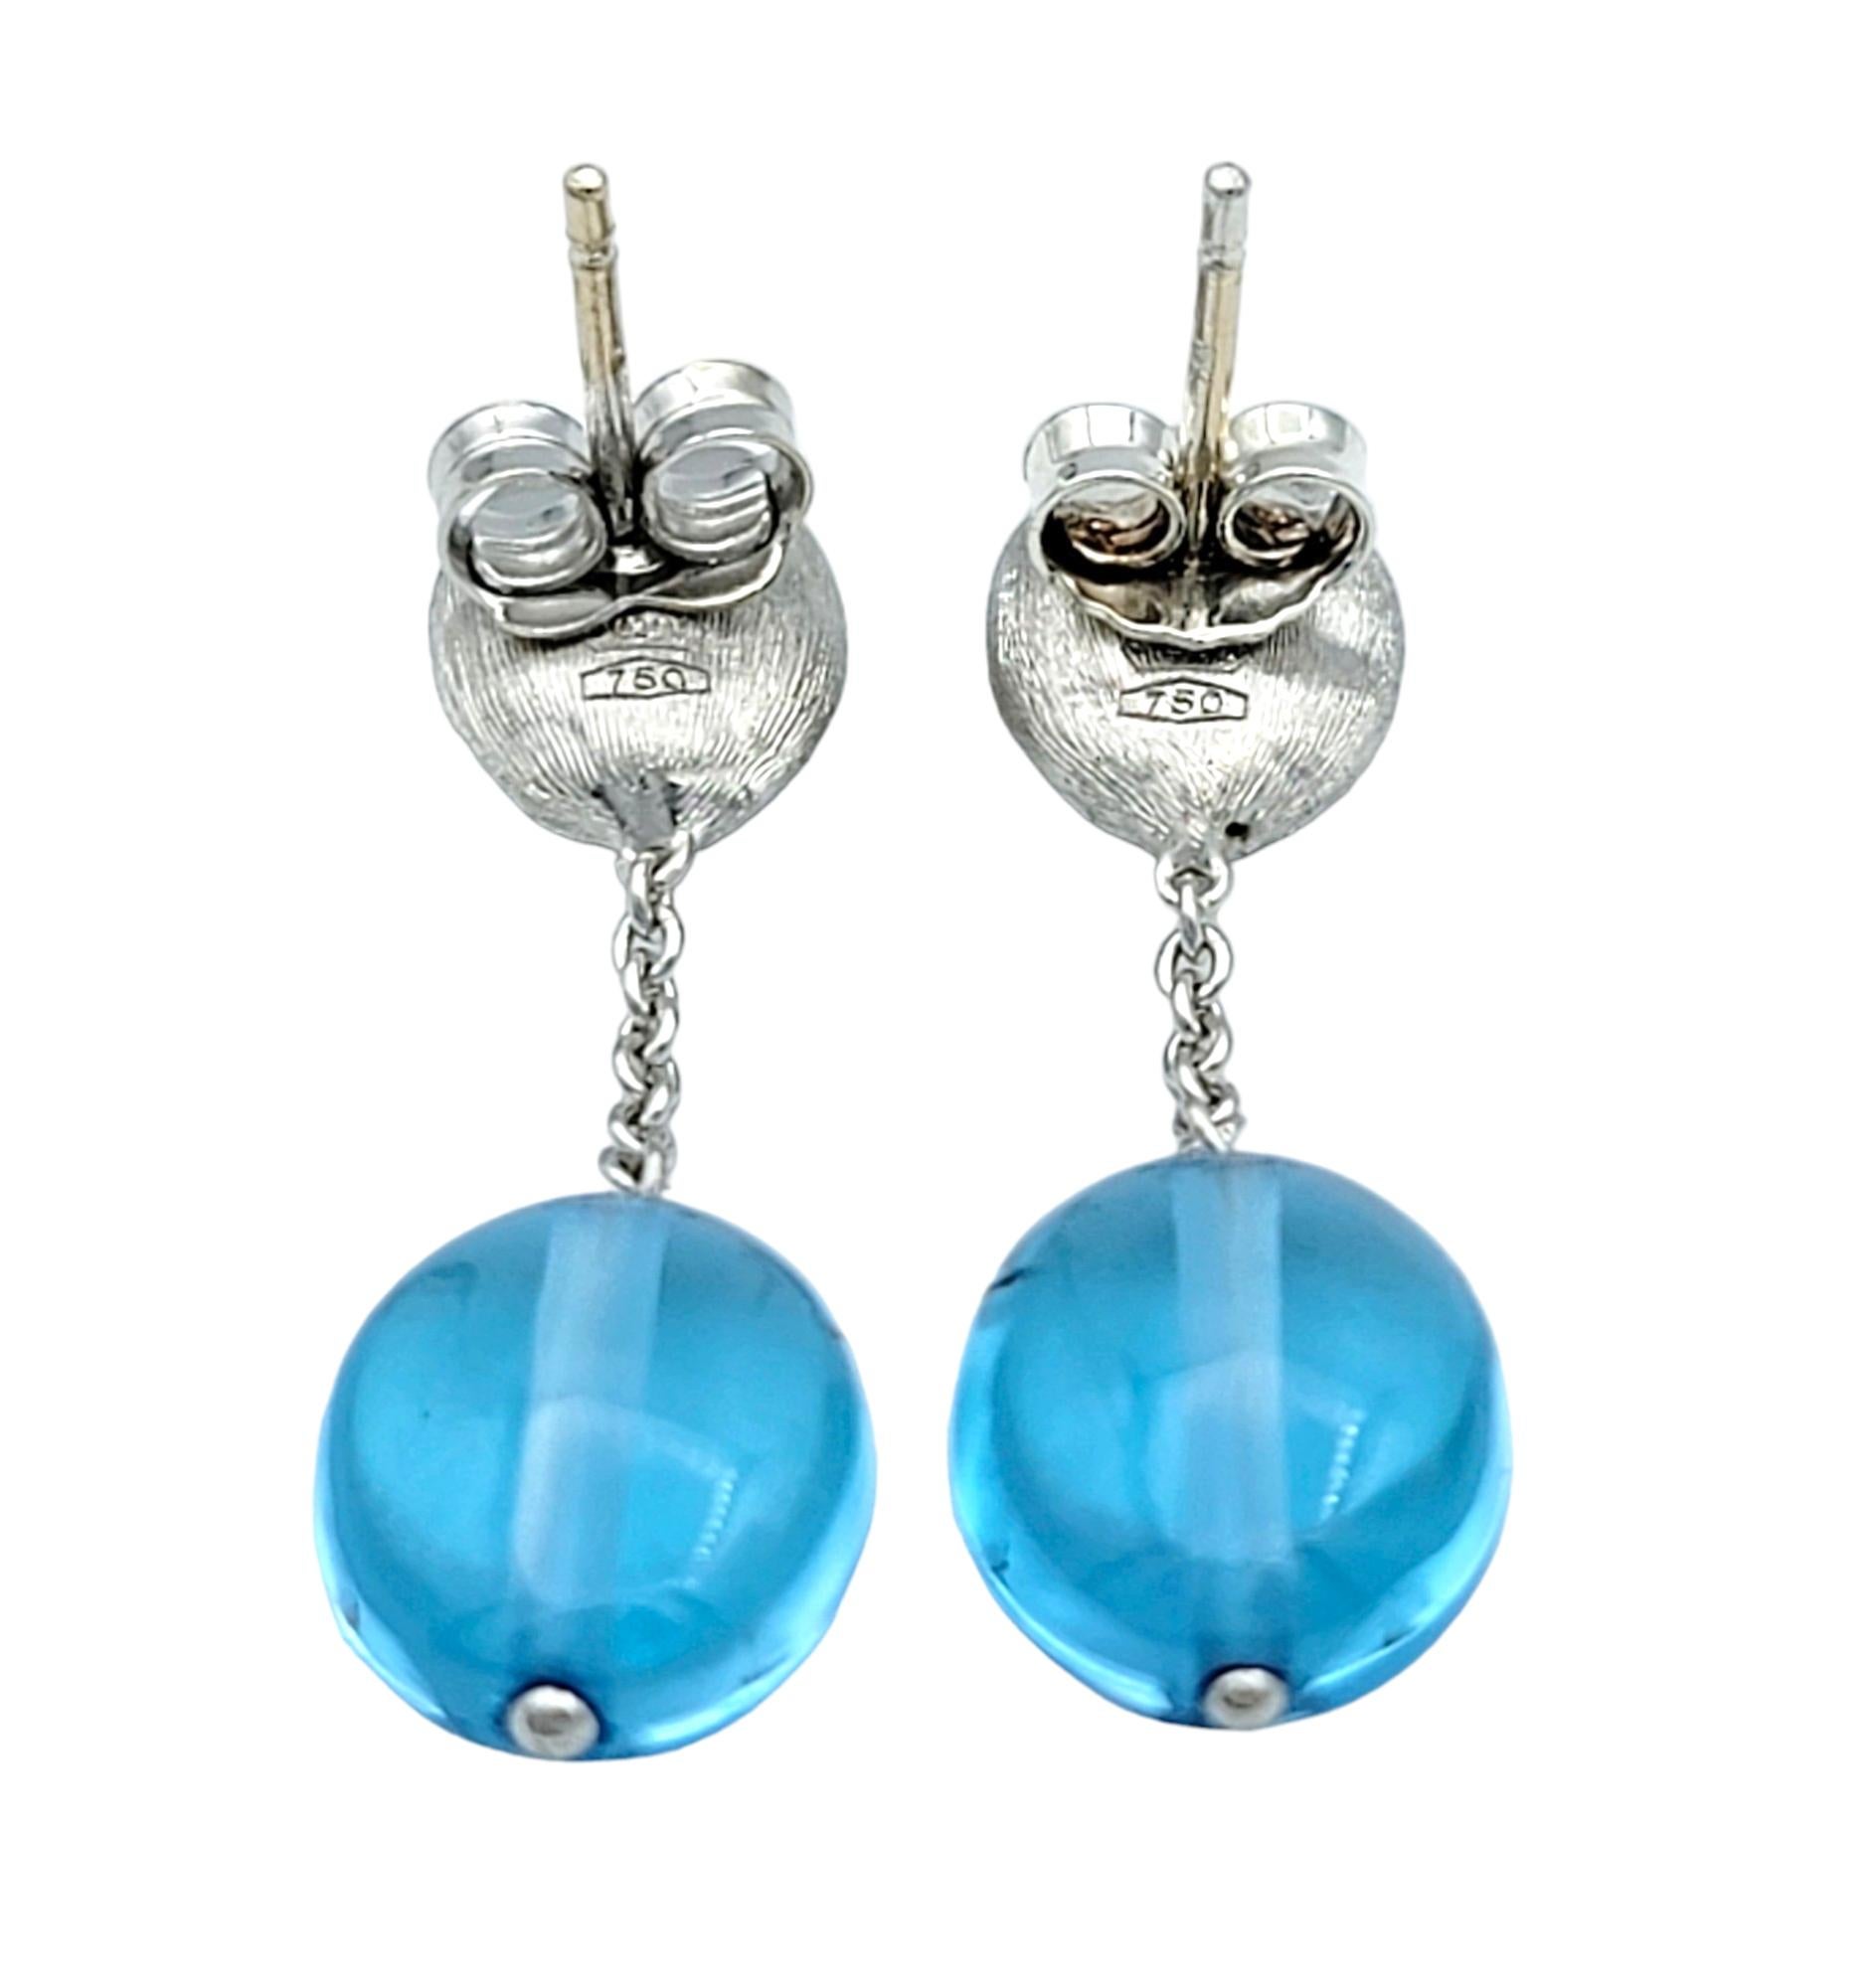 Marco Bicego Siviglia Cabochon Blue Topaz Earrings Set in 18 Karat White Gold In Good Condition For Sale In Scottsdale, AZ